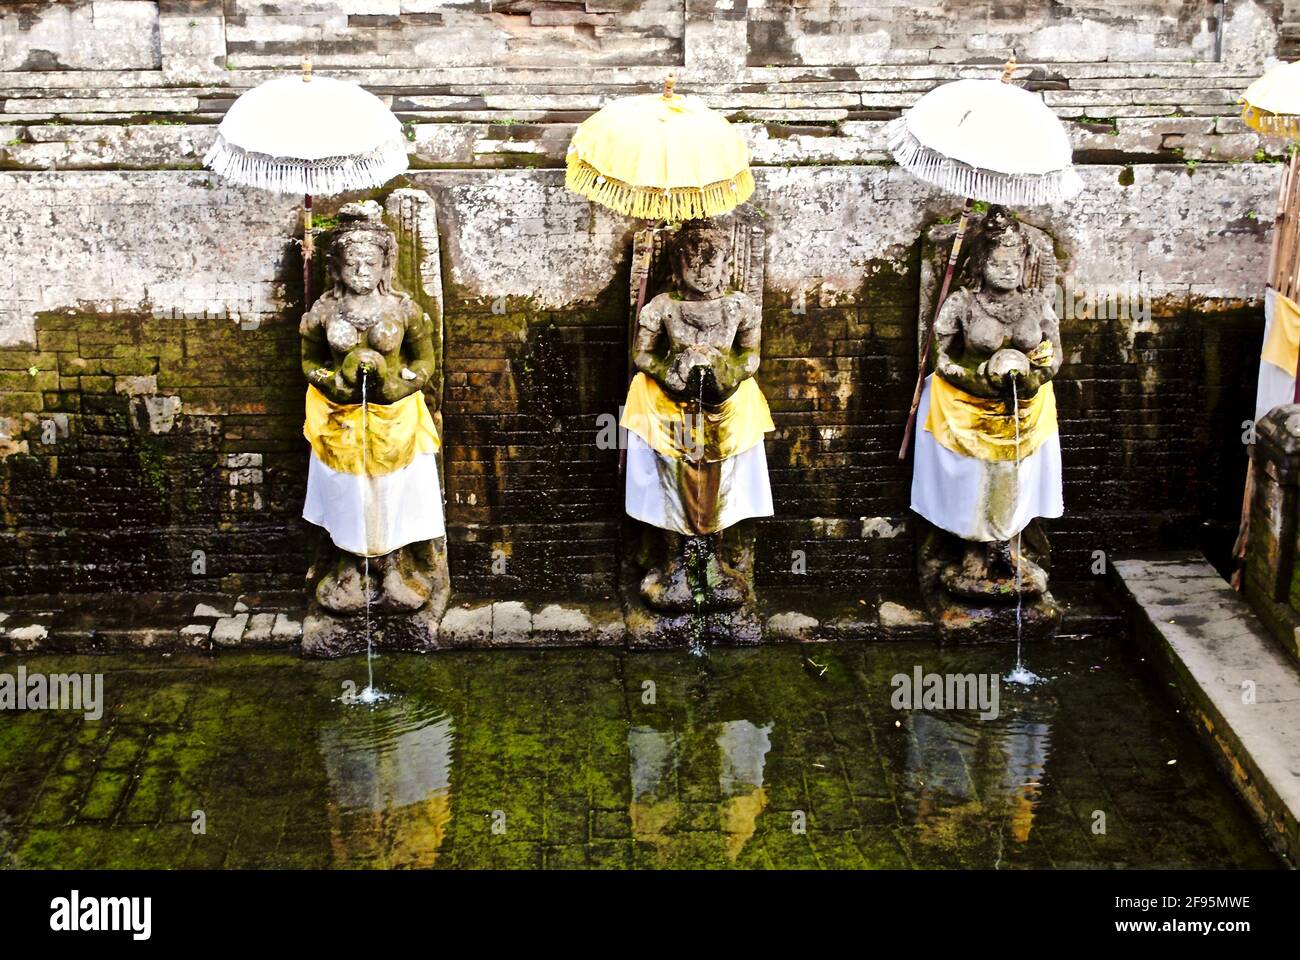 Ubud, Bali, Indonesia: Goa Gajah, or Elephant Cave, sanctuary. Hindu bathing temple statues women with water pitchers that depicts seven holy rivers. Stock Photo